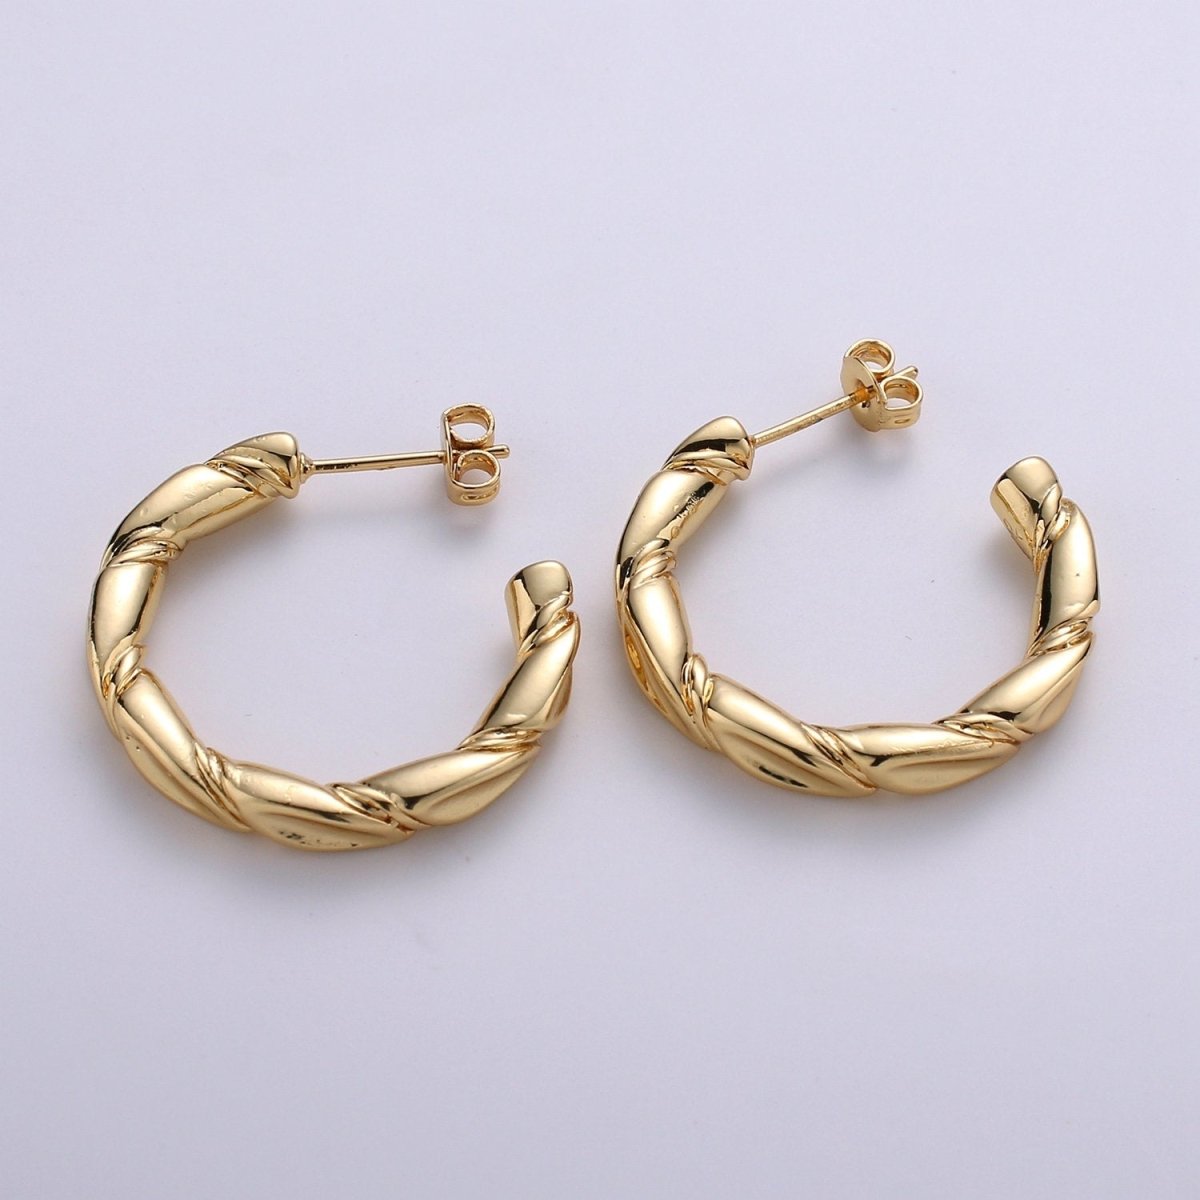 Gold Twisted Hoops, Croissant Hoops, Gold Hoop Earrings, Stud Hoop Earrings, Chunky Hoop Earrings, Thick Hoop Earrings, Bold Hoop Earrings Q-233 - DLUXCA